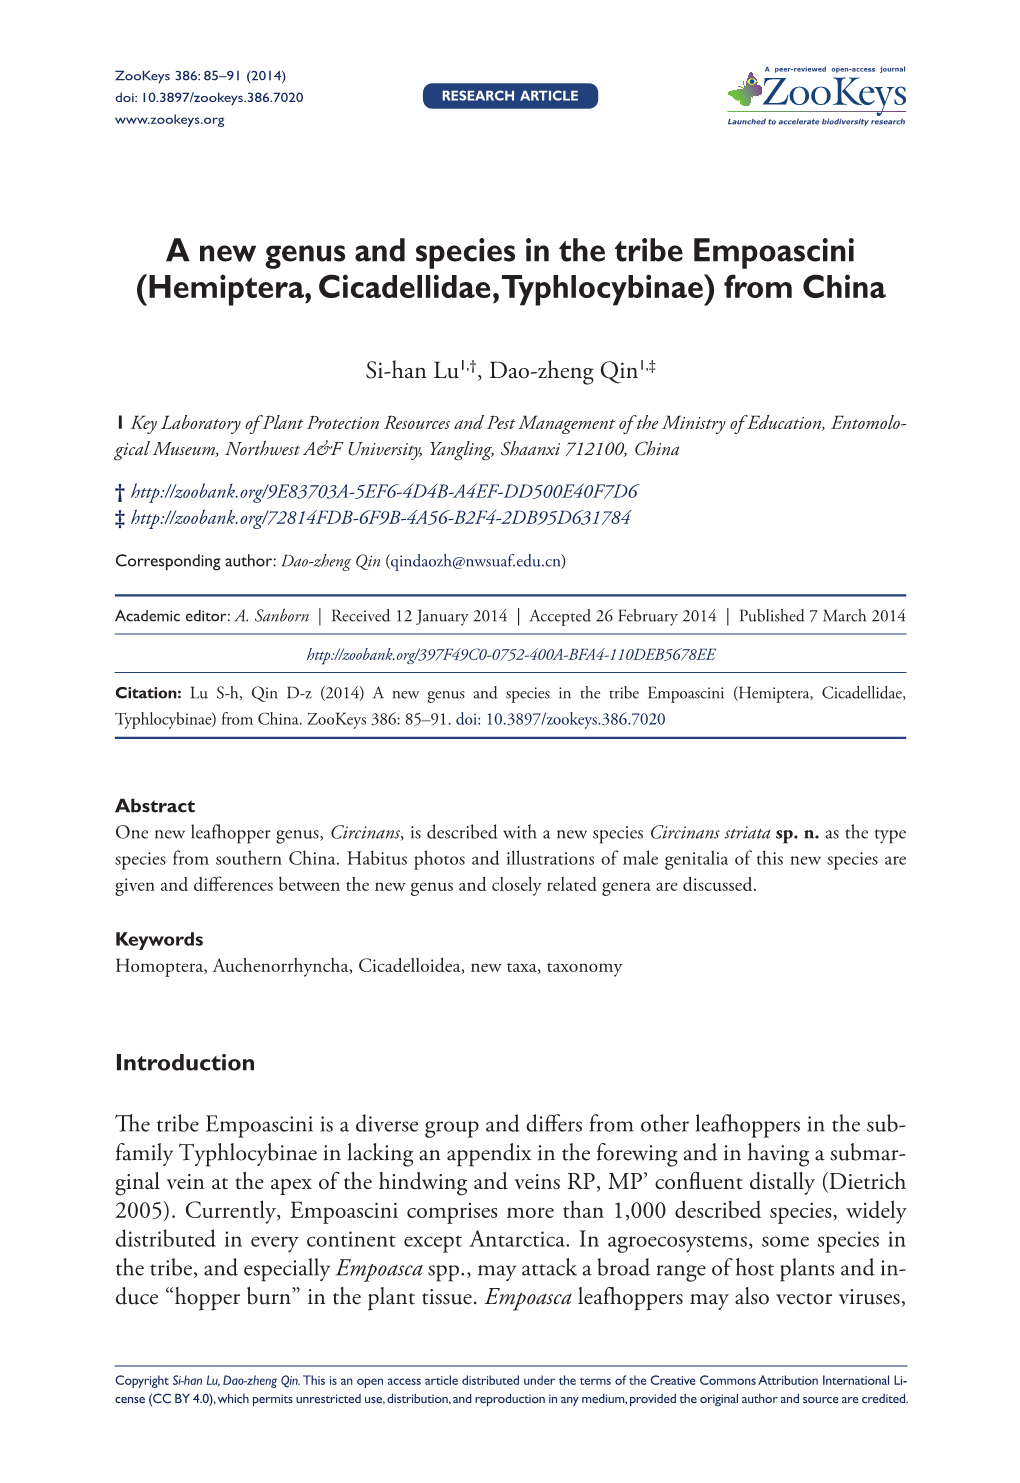 A New Genus and Species in the Tribe Empoascini (Hemiptera, Cicadellidae, Typhlocybinae) from China